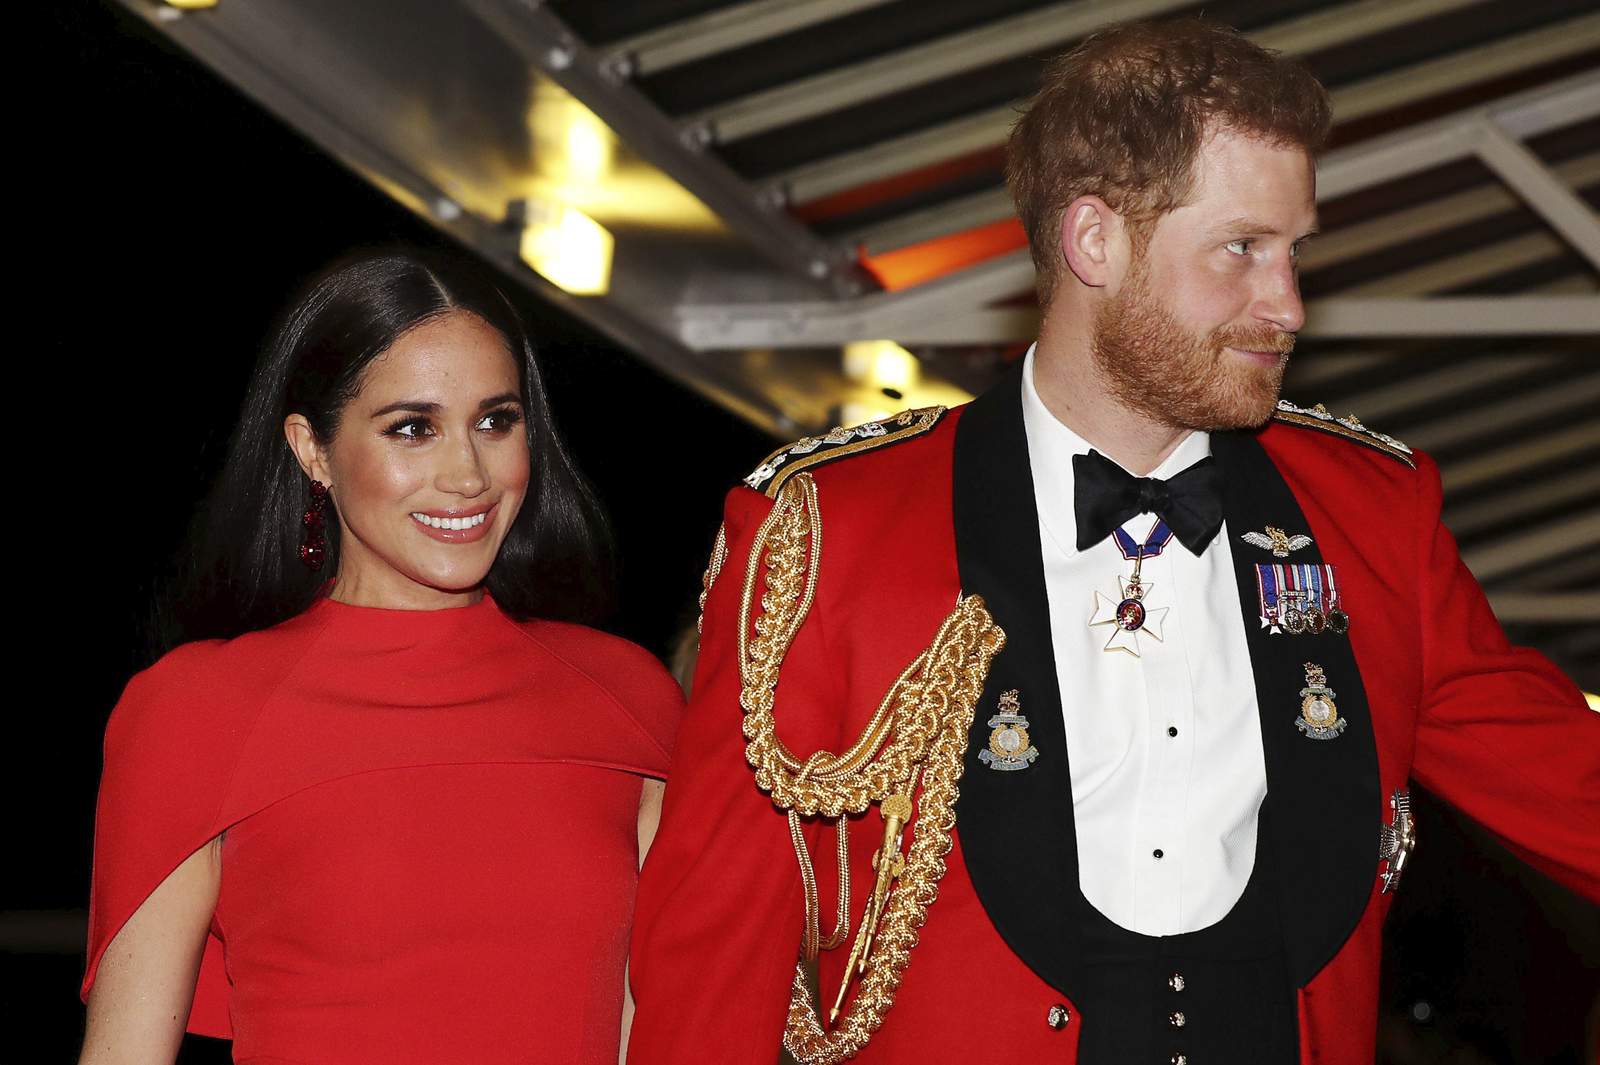 Prince Harry and Meghan Markle will not return as working members of royal family